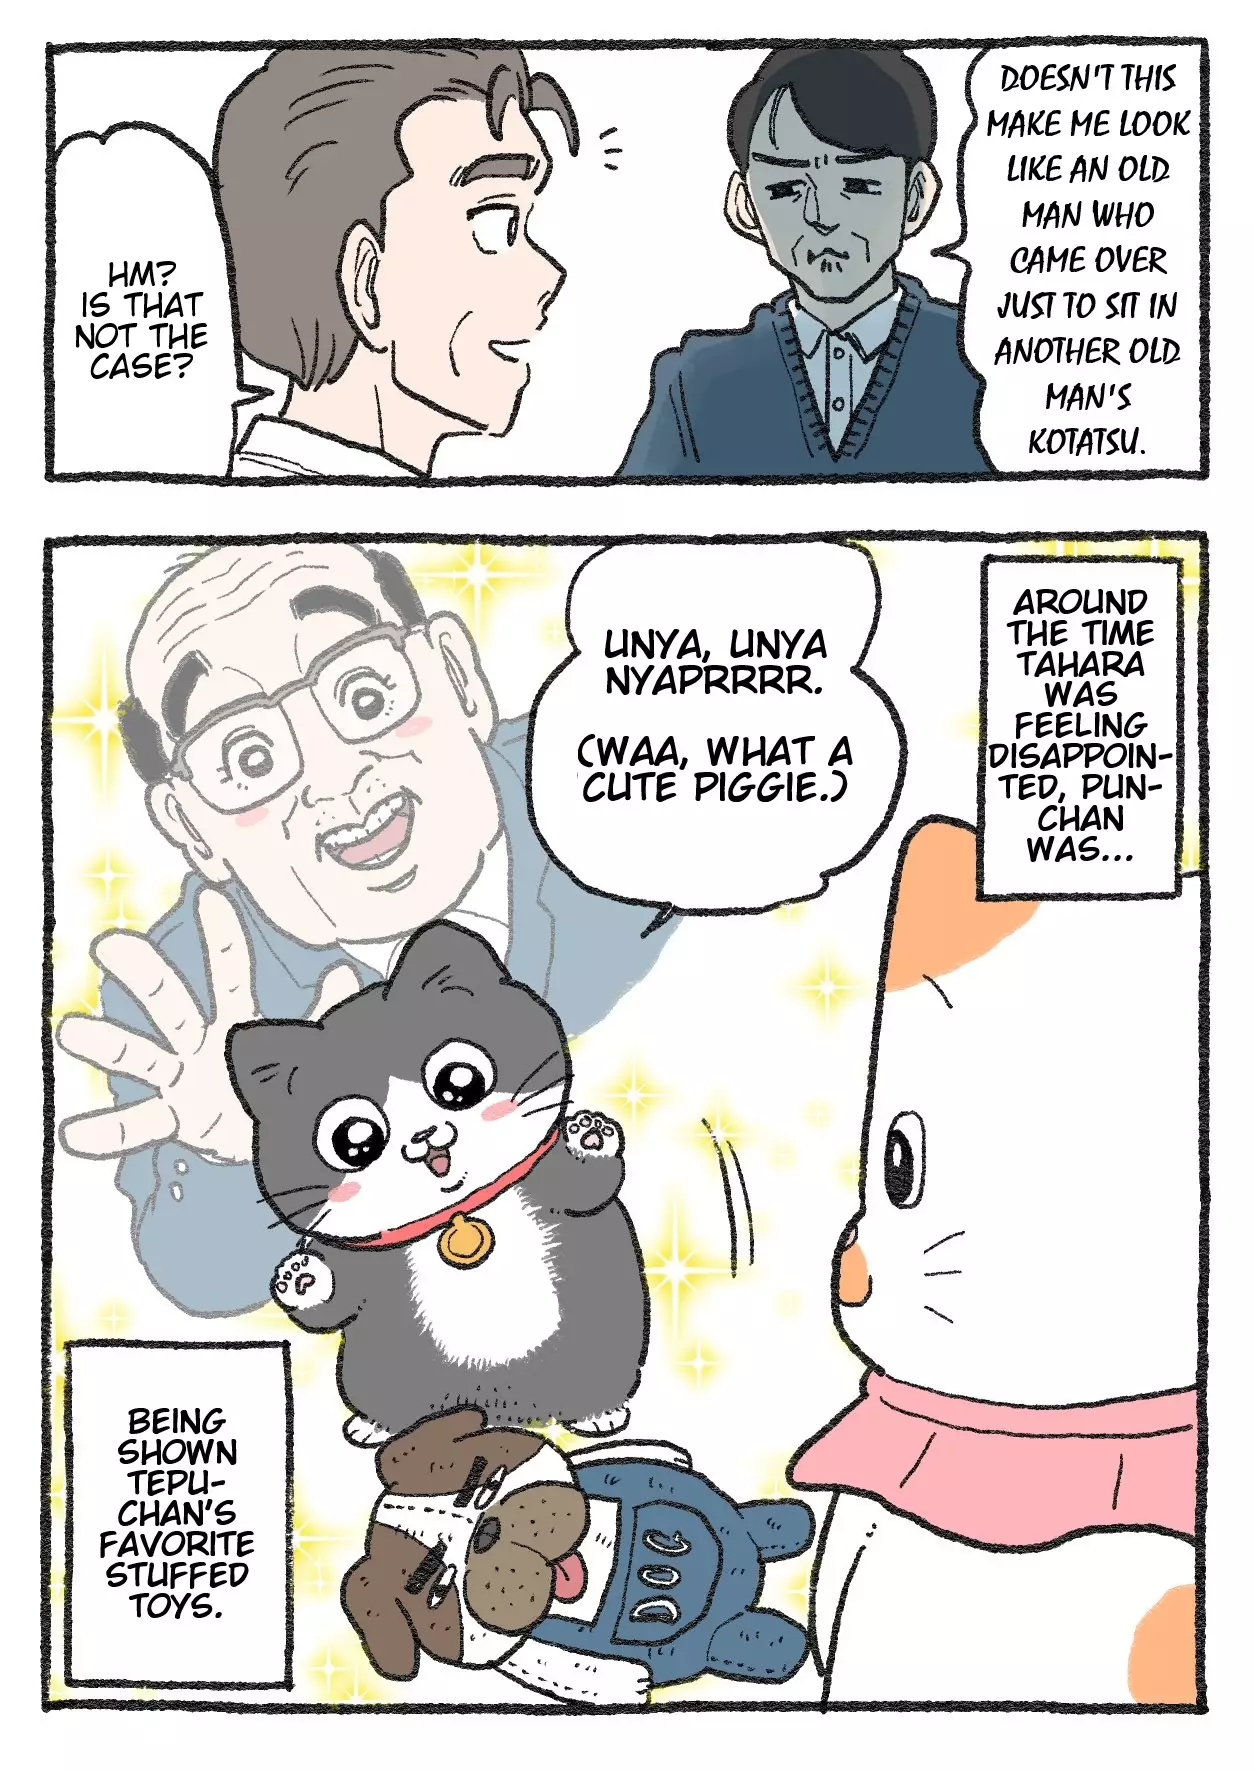 The Old Man Who Was Reincarnated As A Cat - 298 page 2-7656d6d7